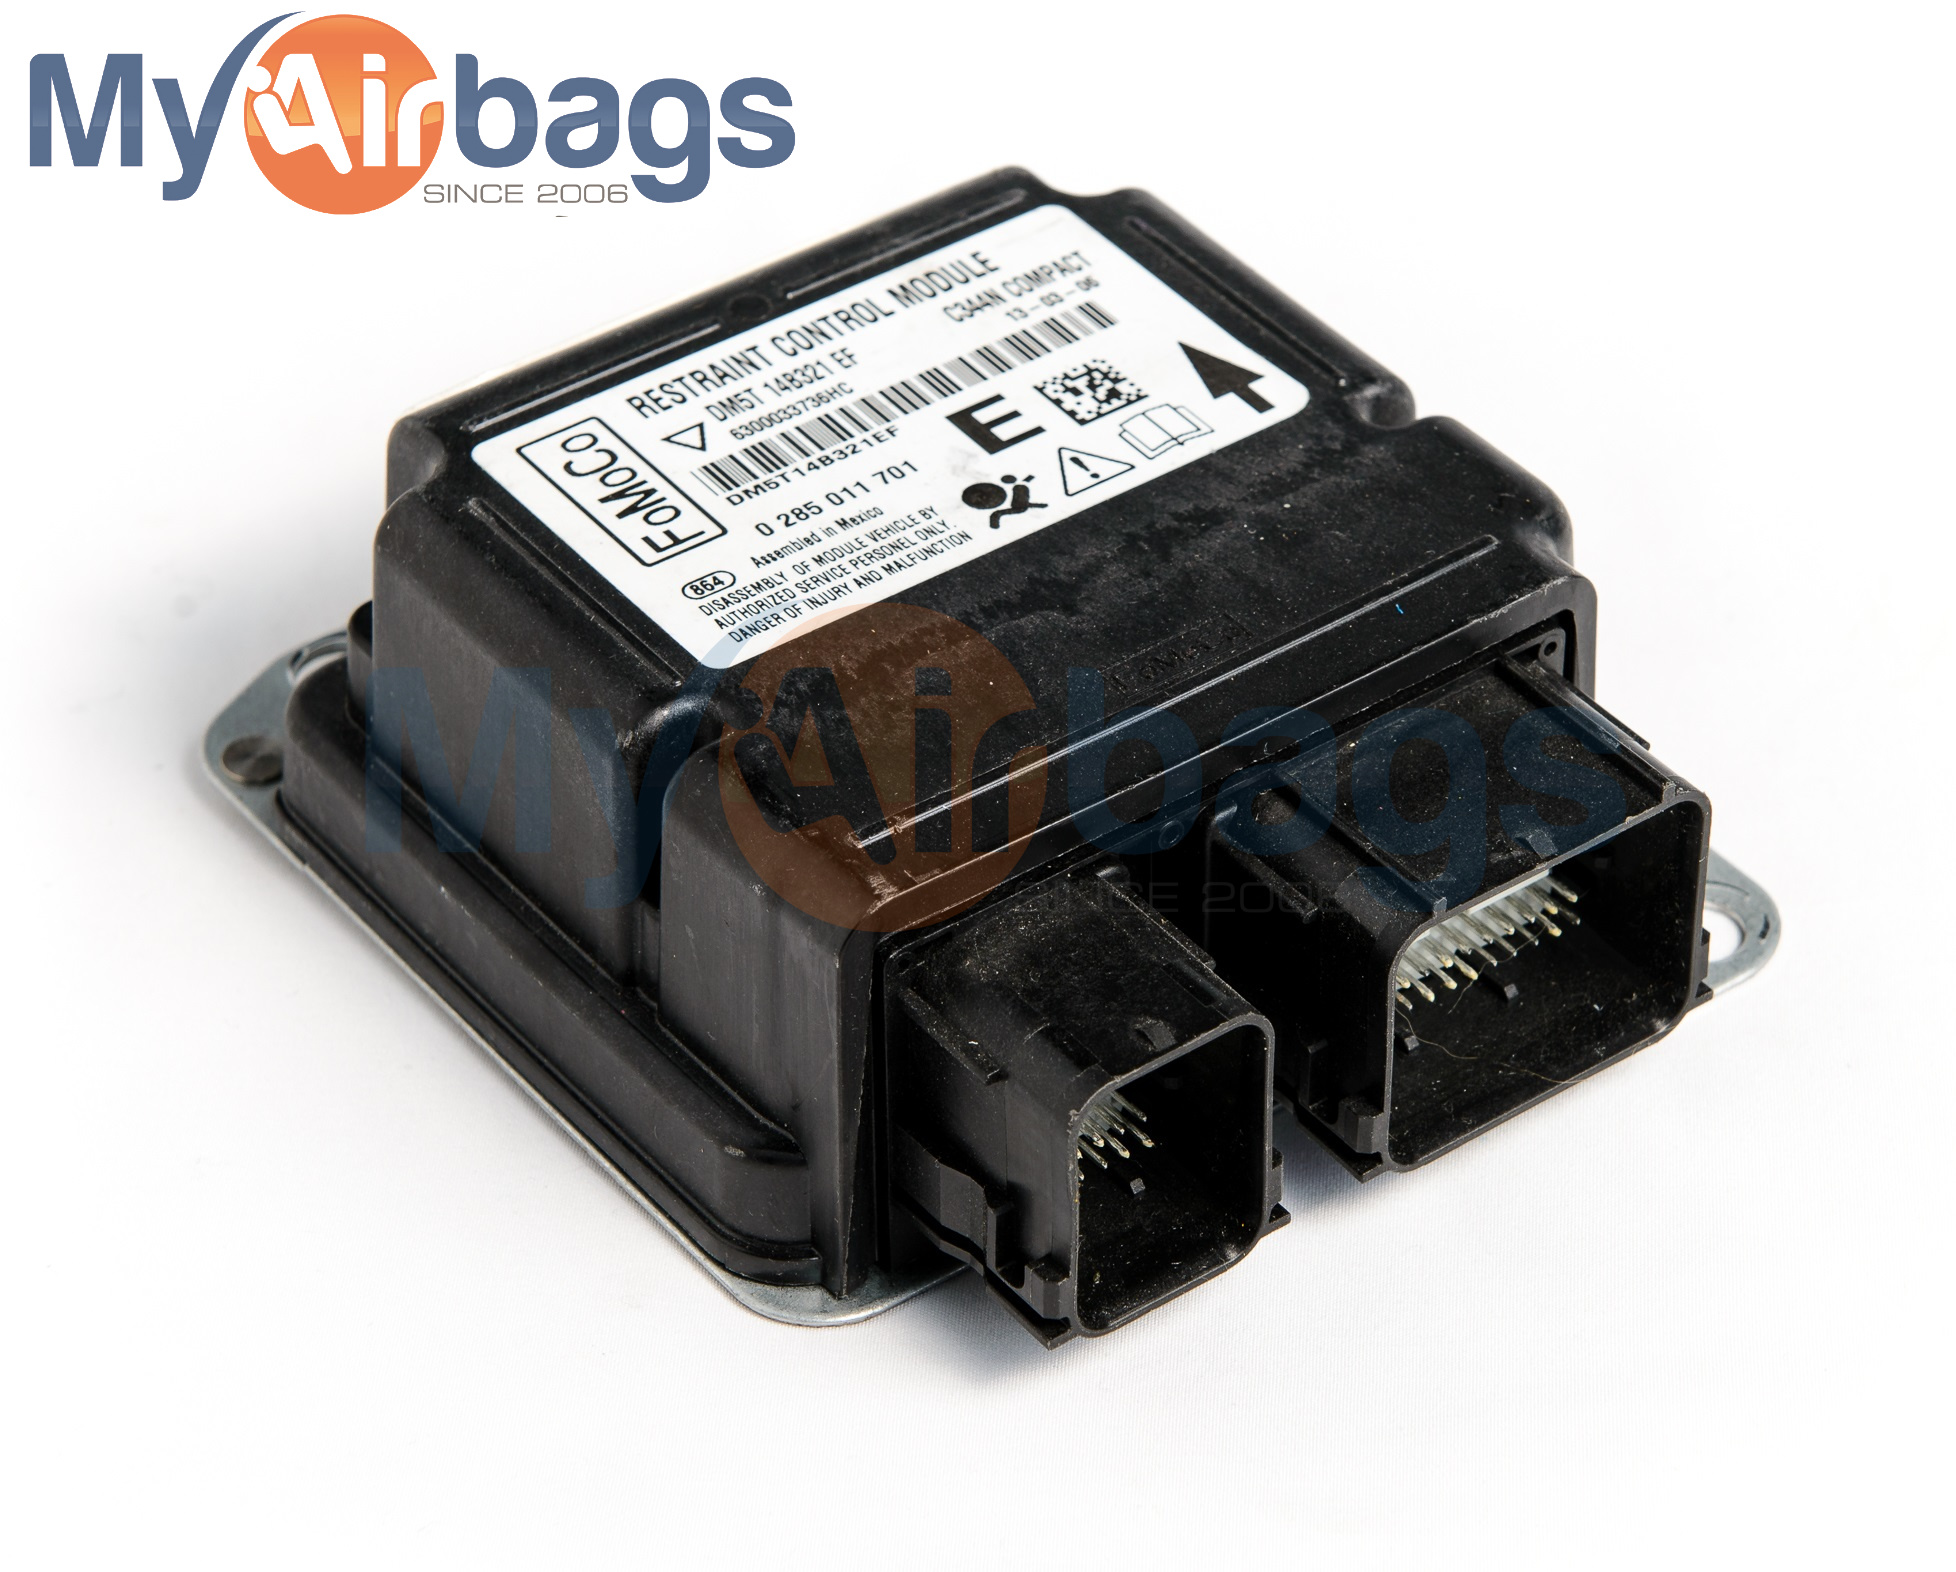 MyAirbags-Airbag-Module-Airbag-Reset-Ford-Escape-Fusion-Lincoln.jpg